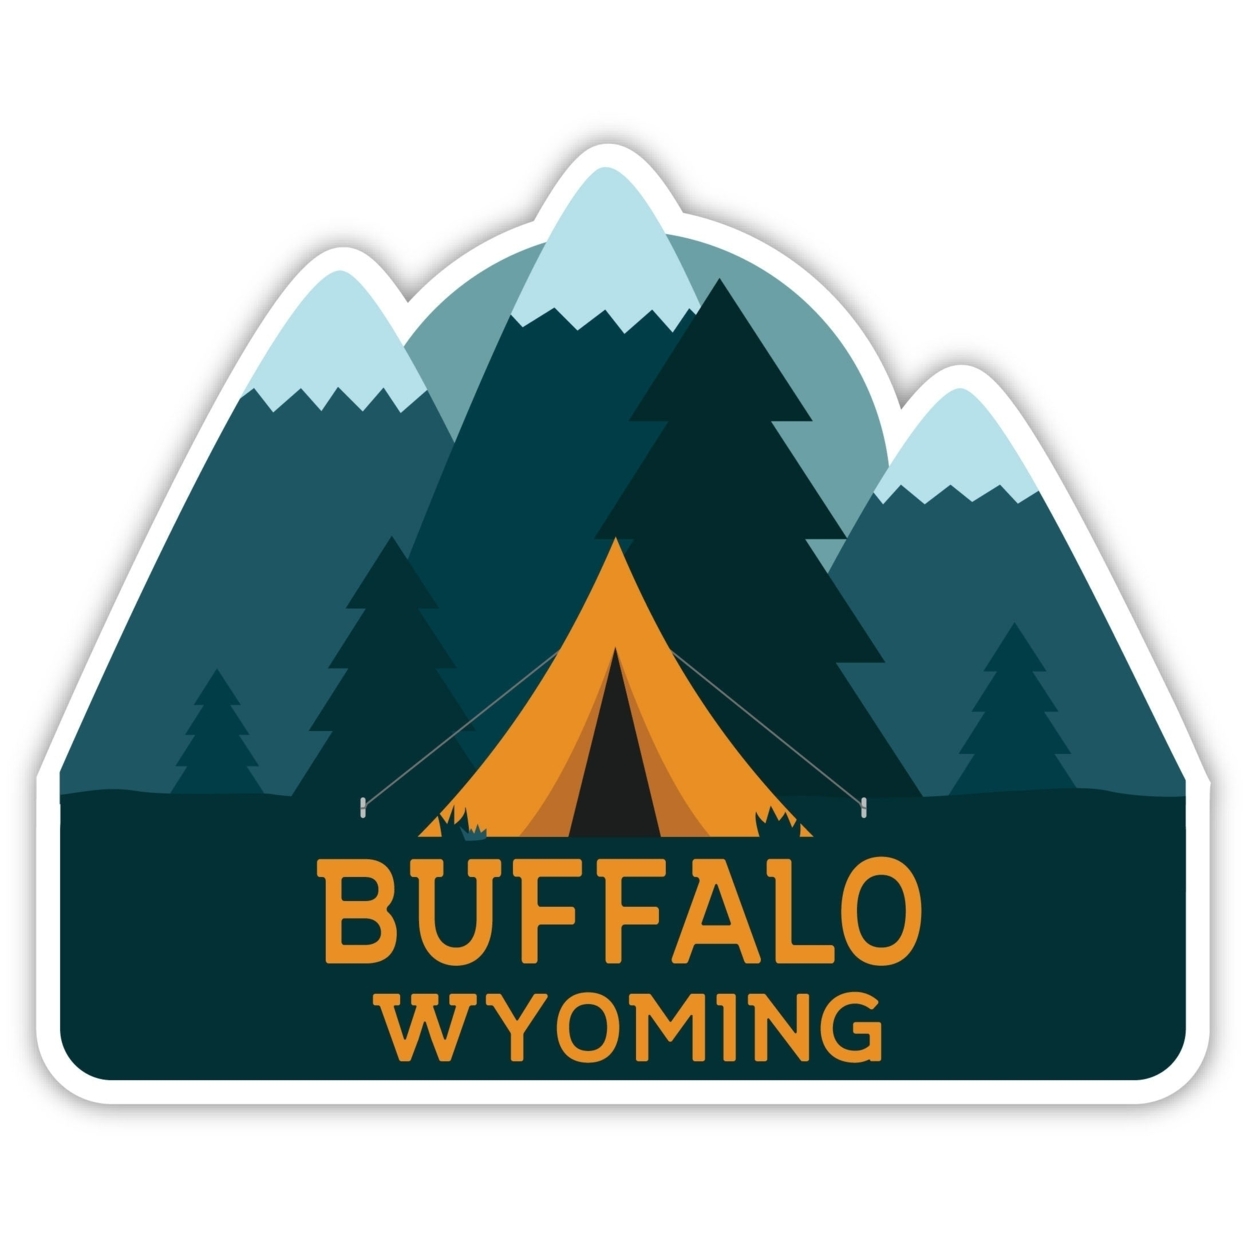 Buffalo Wyoming Souvenir Decorative Stickers (Choose Theme And Size) - Single Unit, 4-Inch, Adventures Awaits